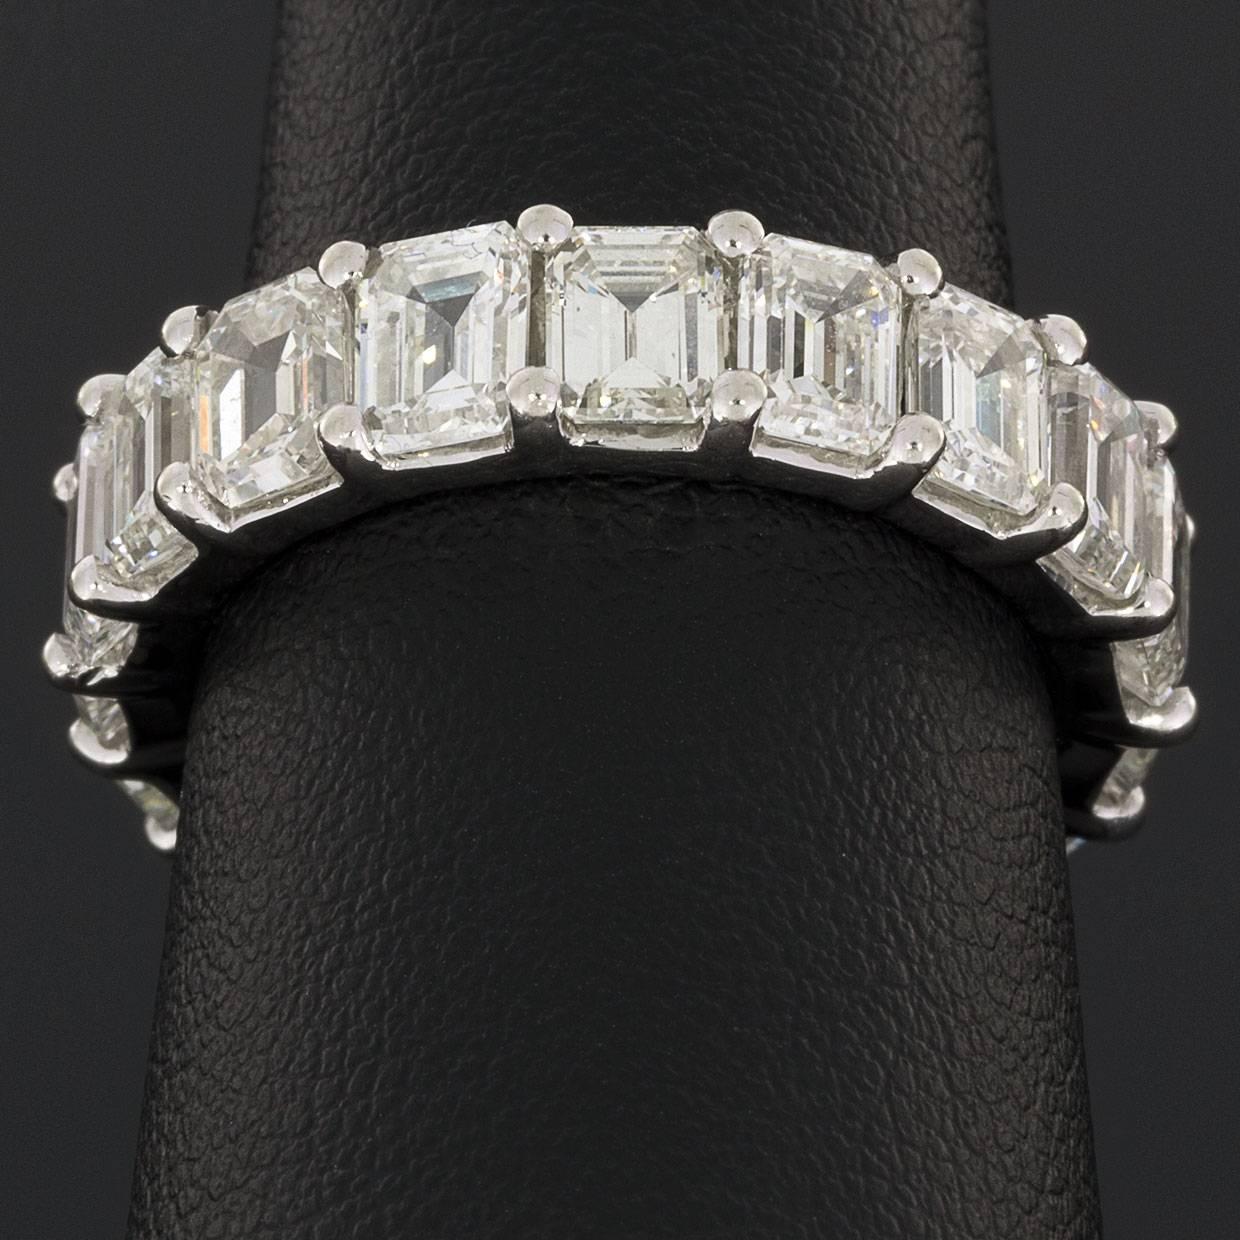 Women's Magnificent Emerald Cut Diamond White Gold Eternity Band Ring